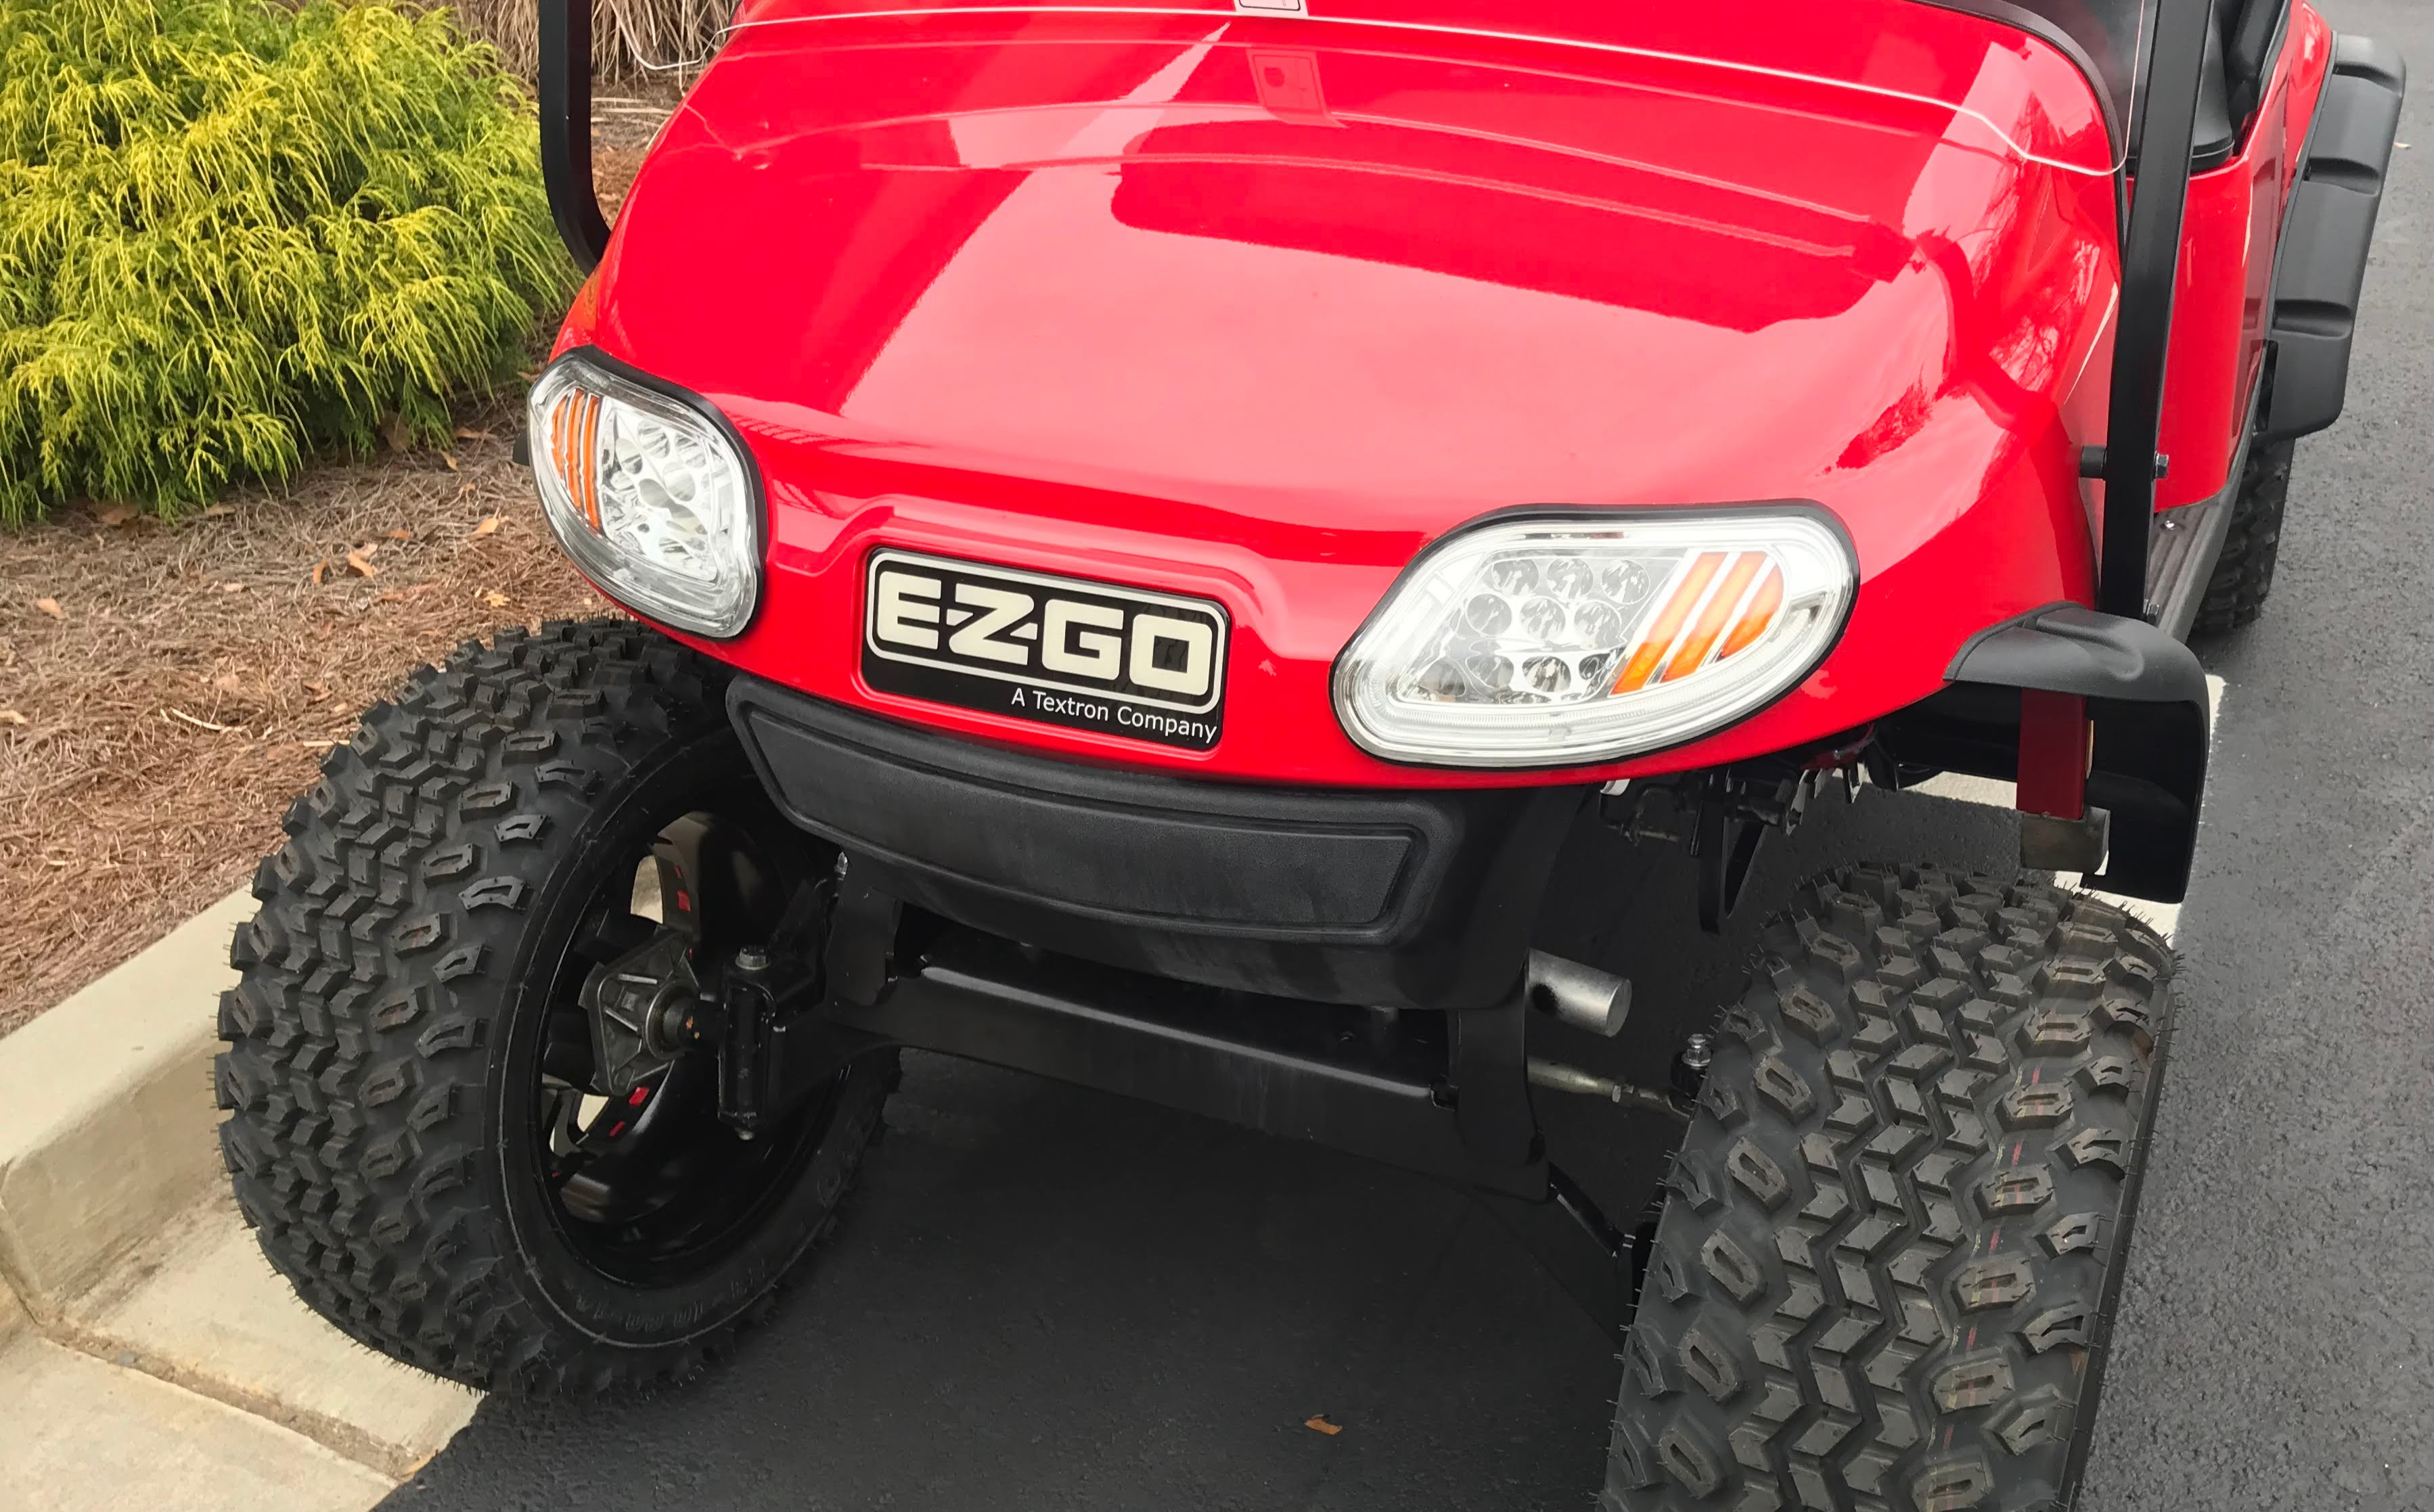 Golf Cart Serial Number: How to find on Club, Yamaha and EZ Go carts.